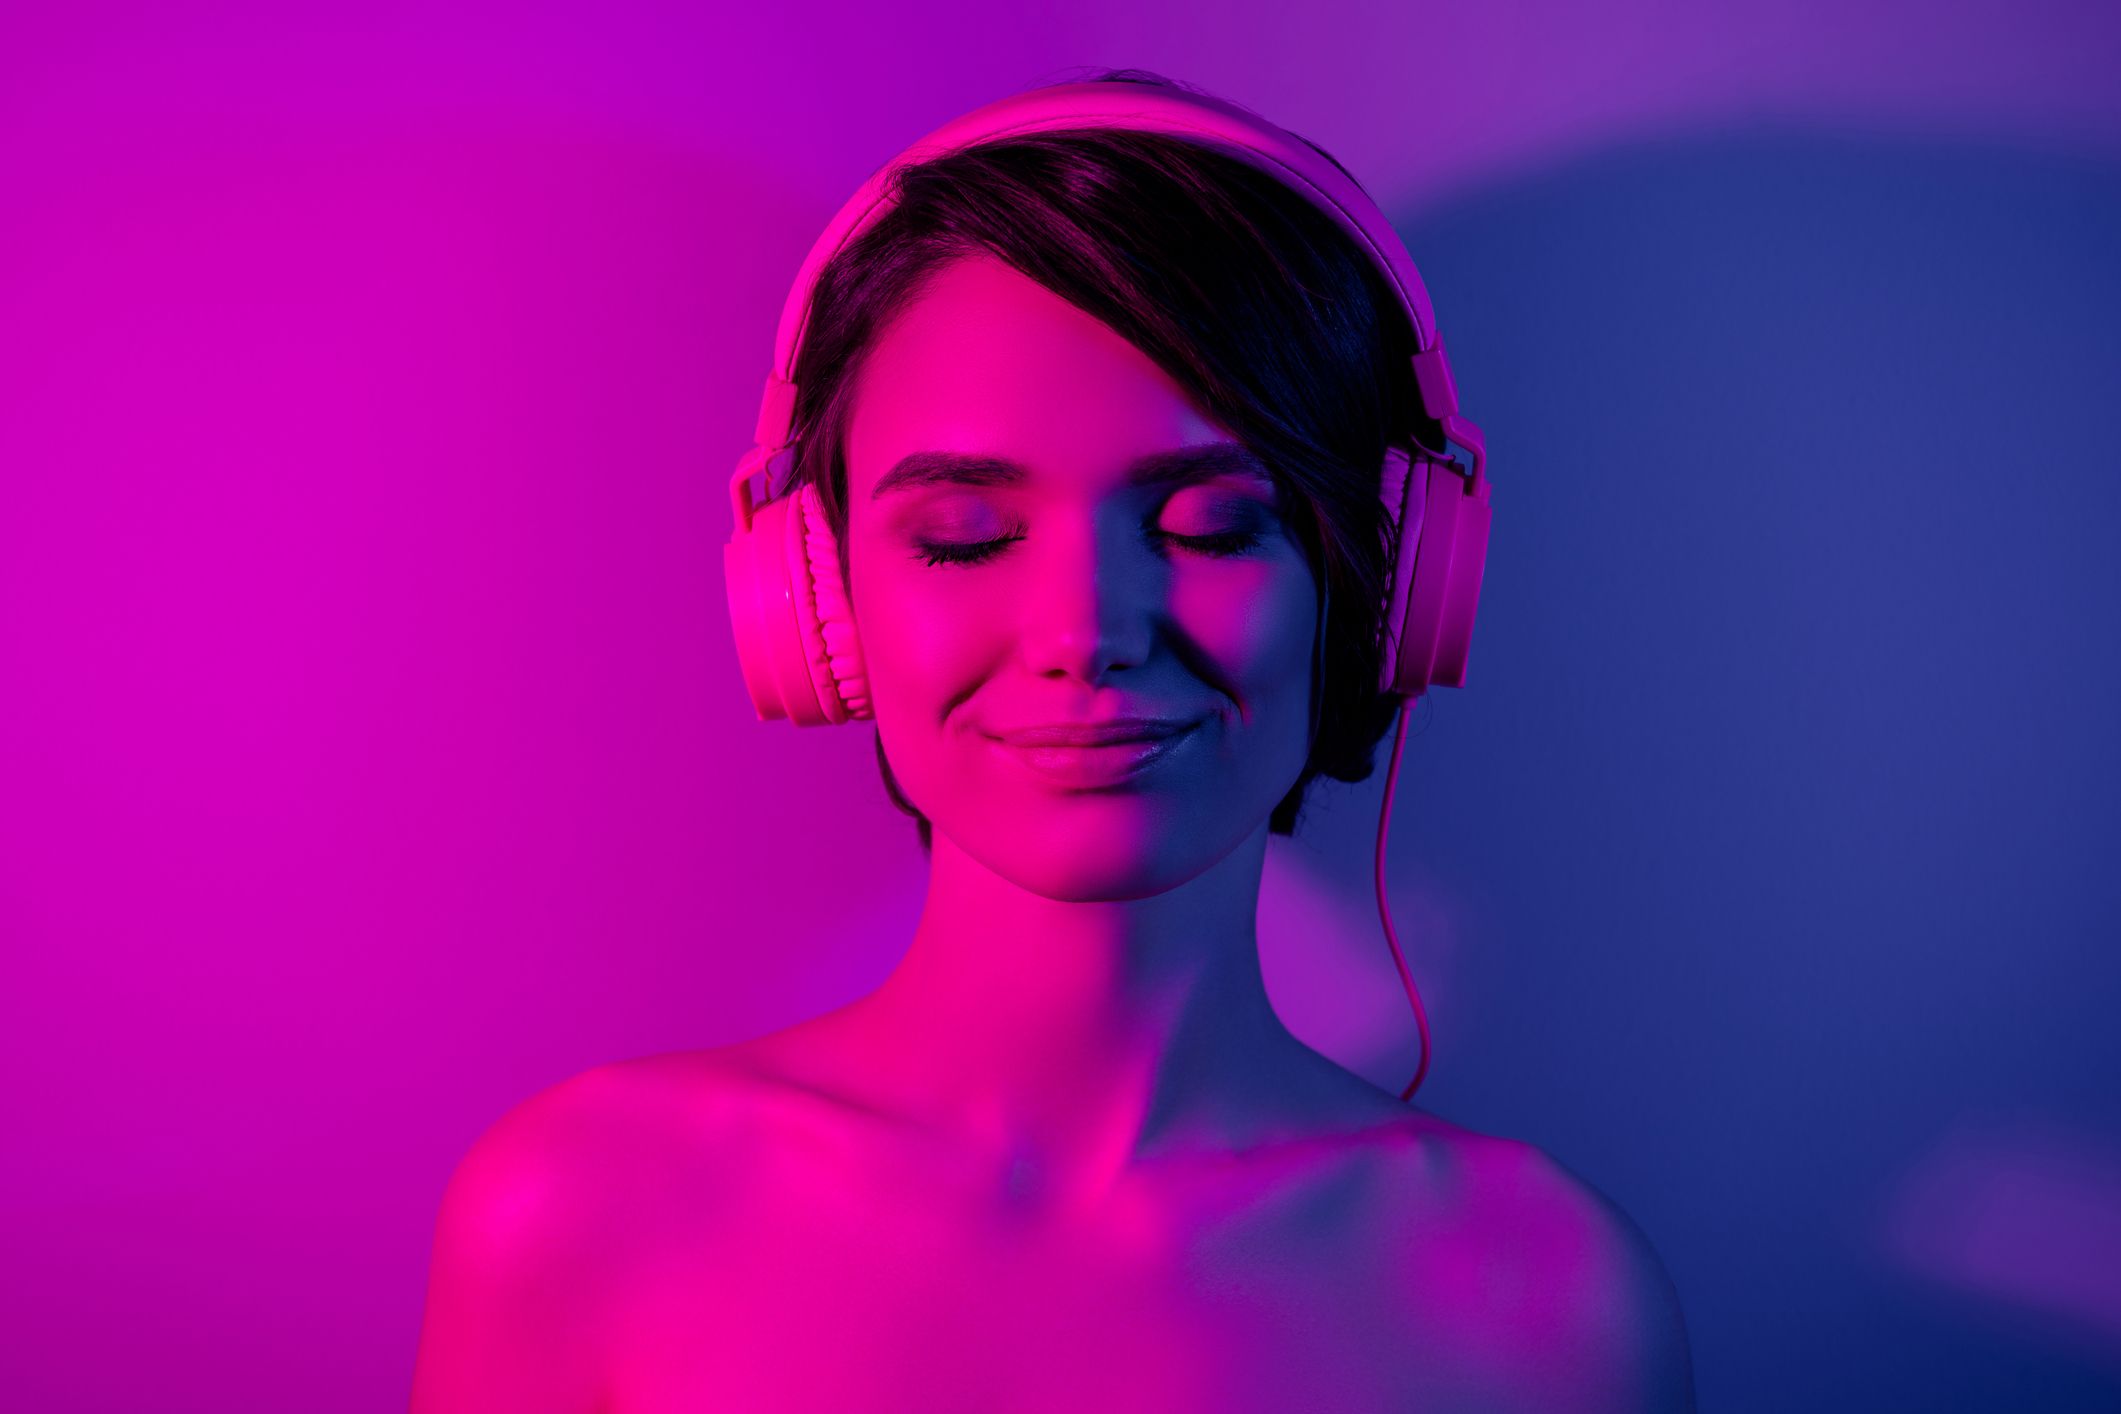 15 Audio Porn Options and Podcasts